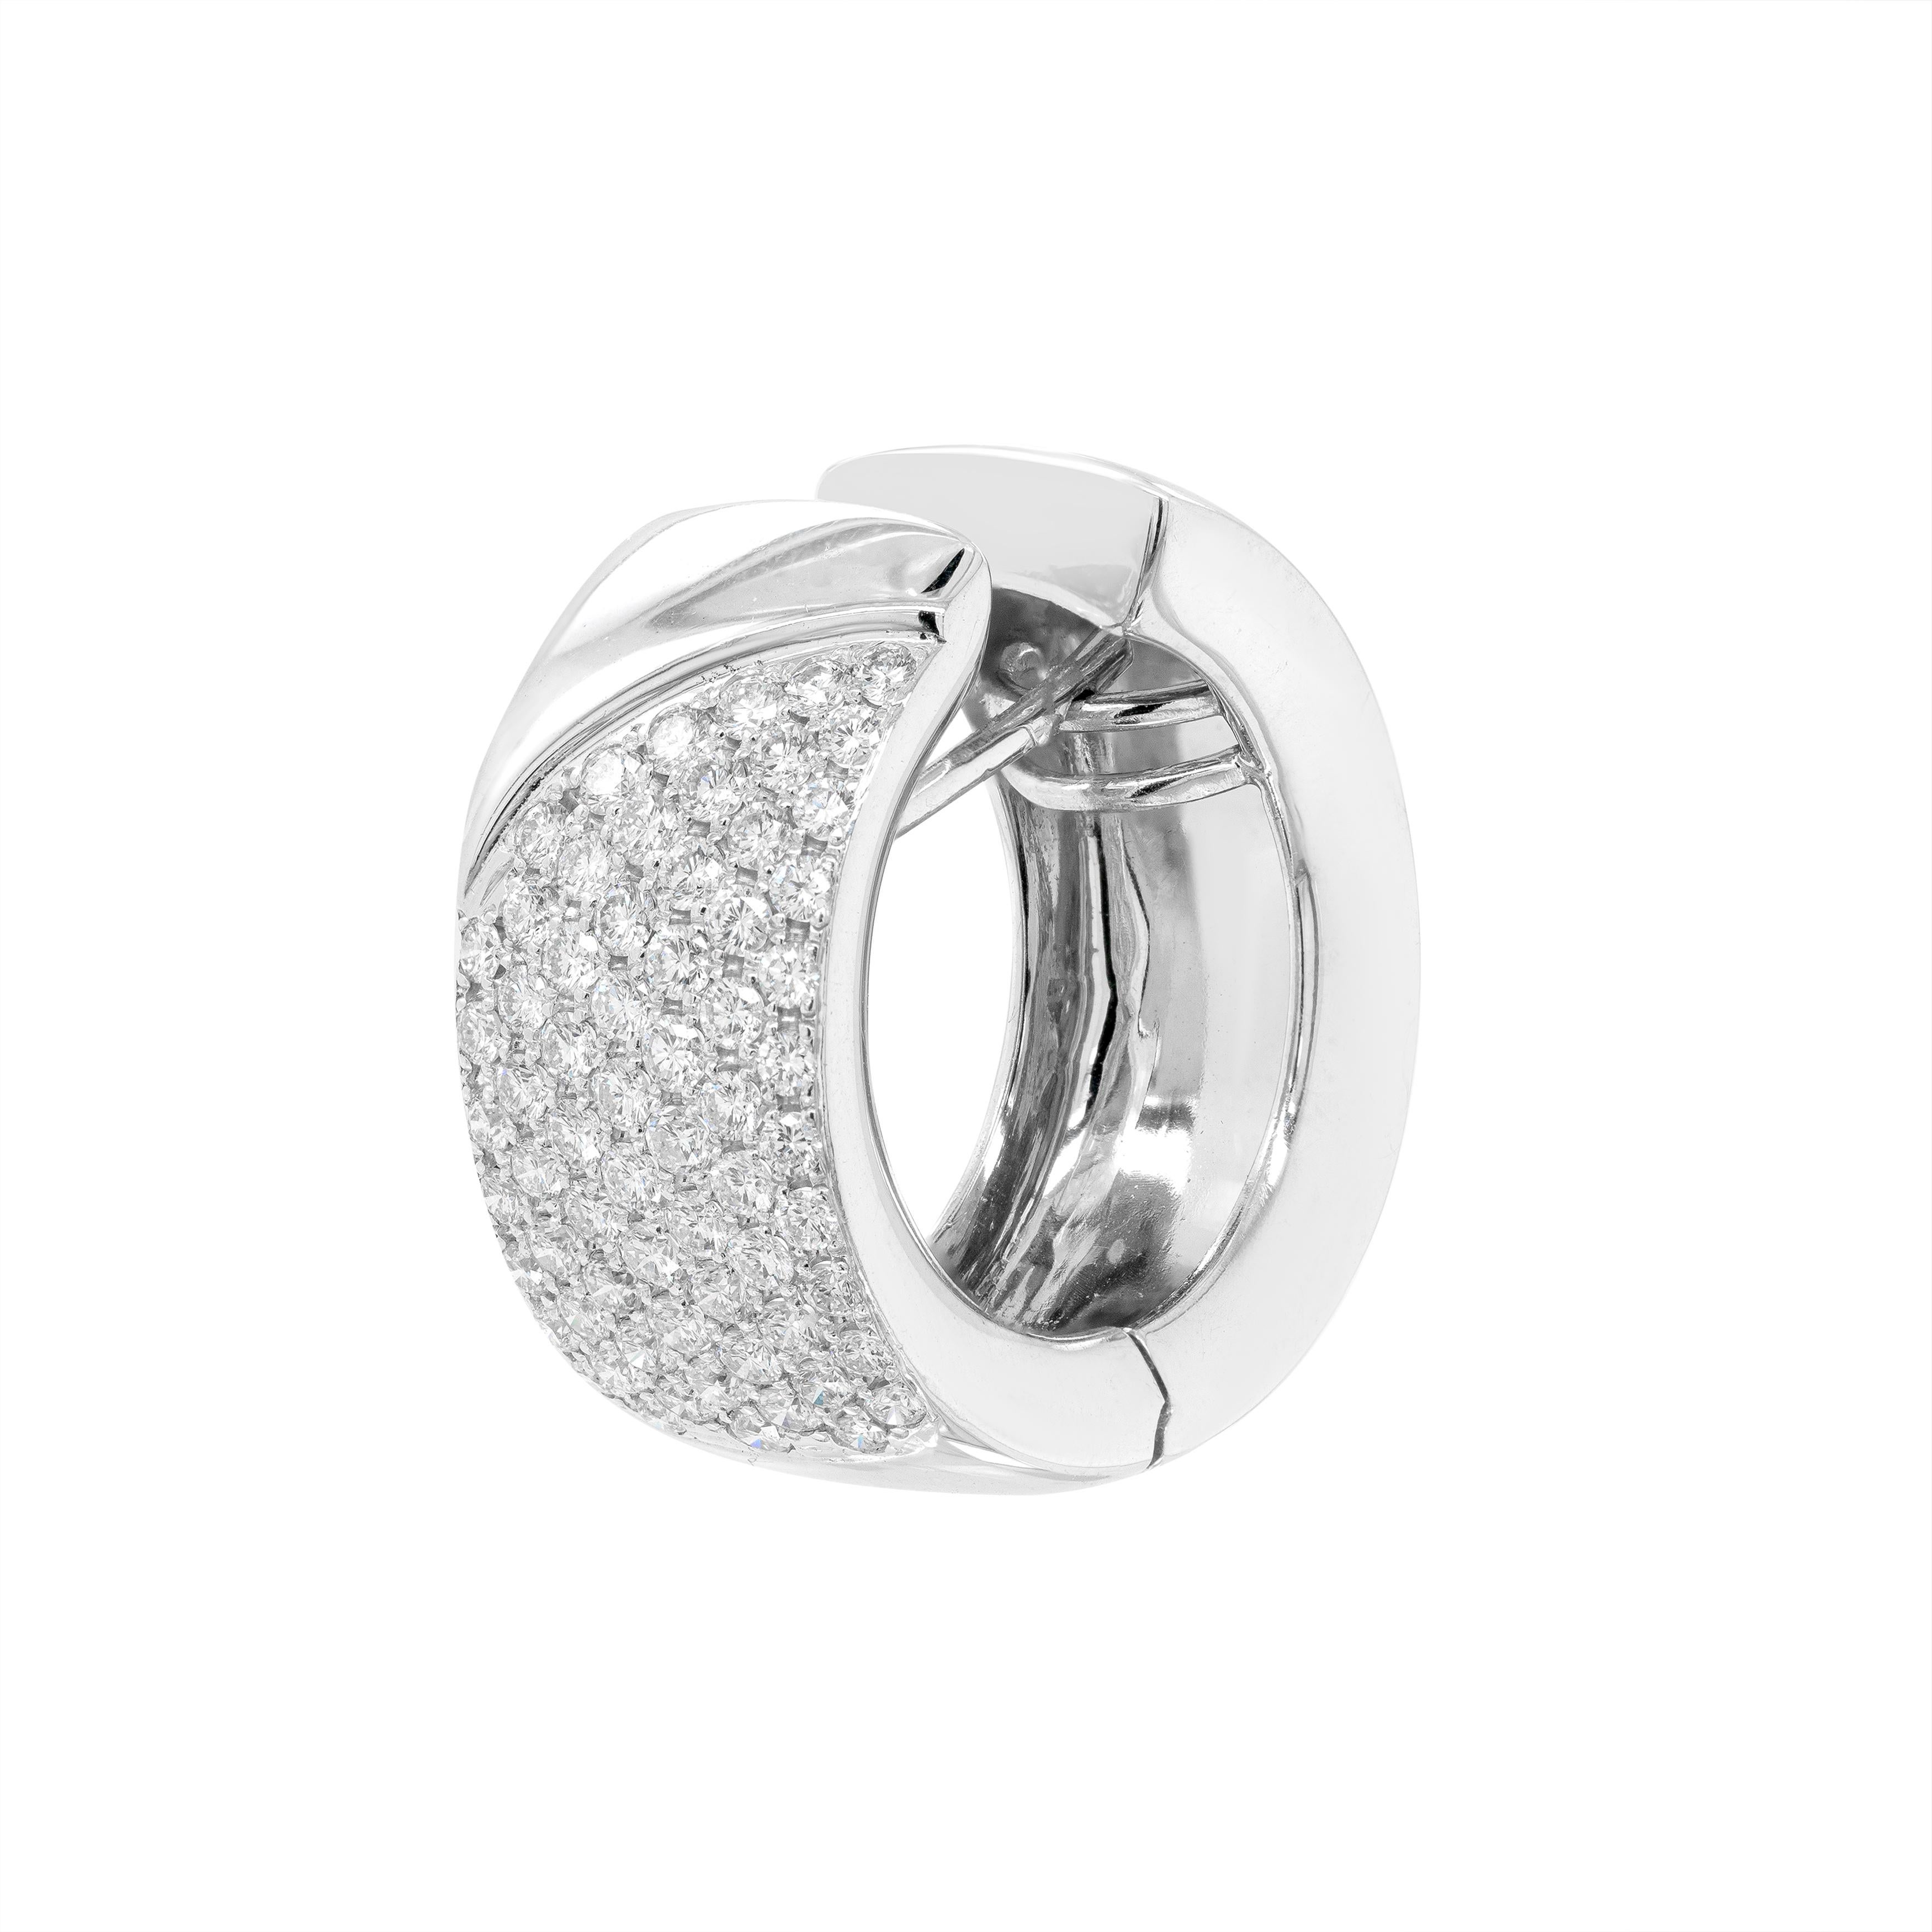 These chic and classic rounded huggie hoop earrings are each beautifully pavé set with 67 fine quality round brilliant cut diamonds, weighing a total approximate combined weight of 2.00ct. The stylish earrings are crafted from high-polish 18 carat